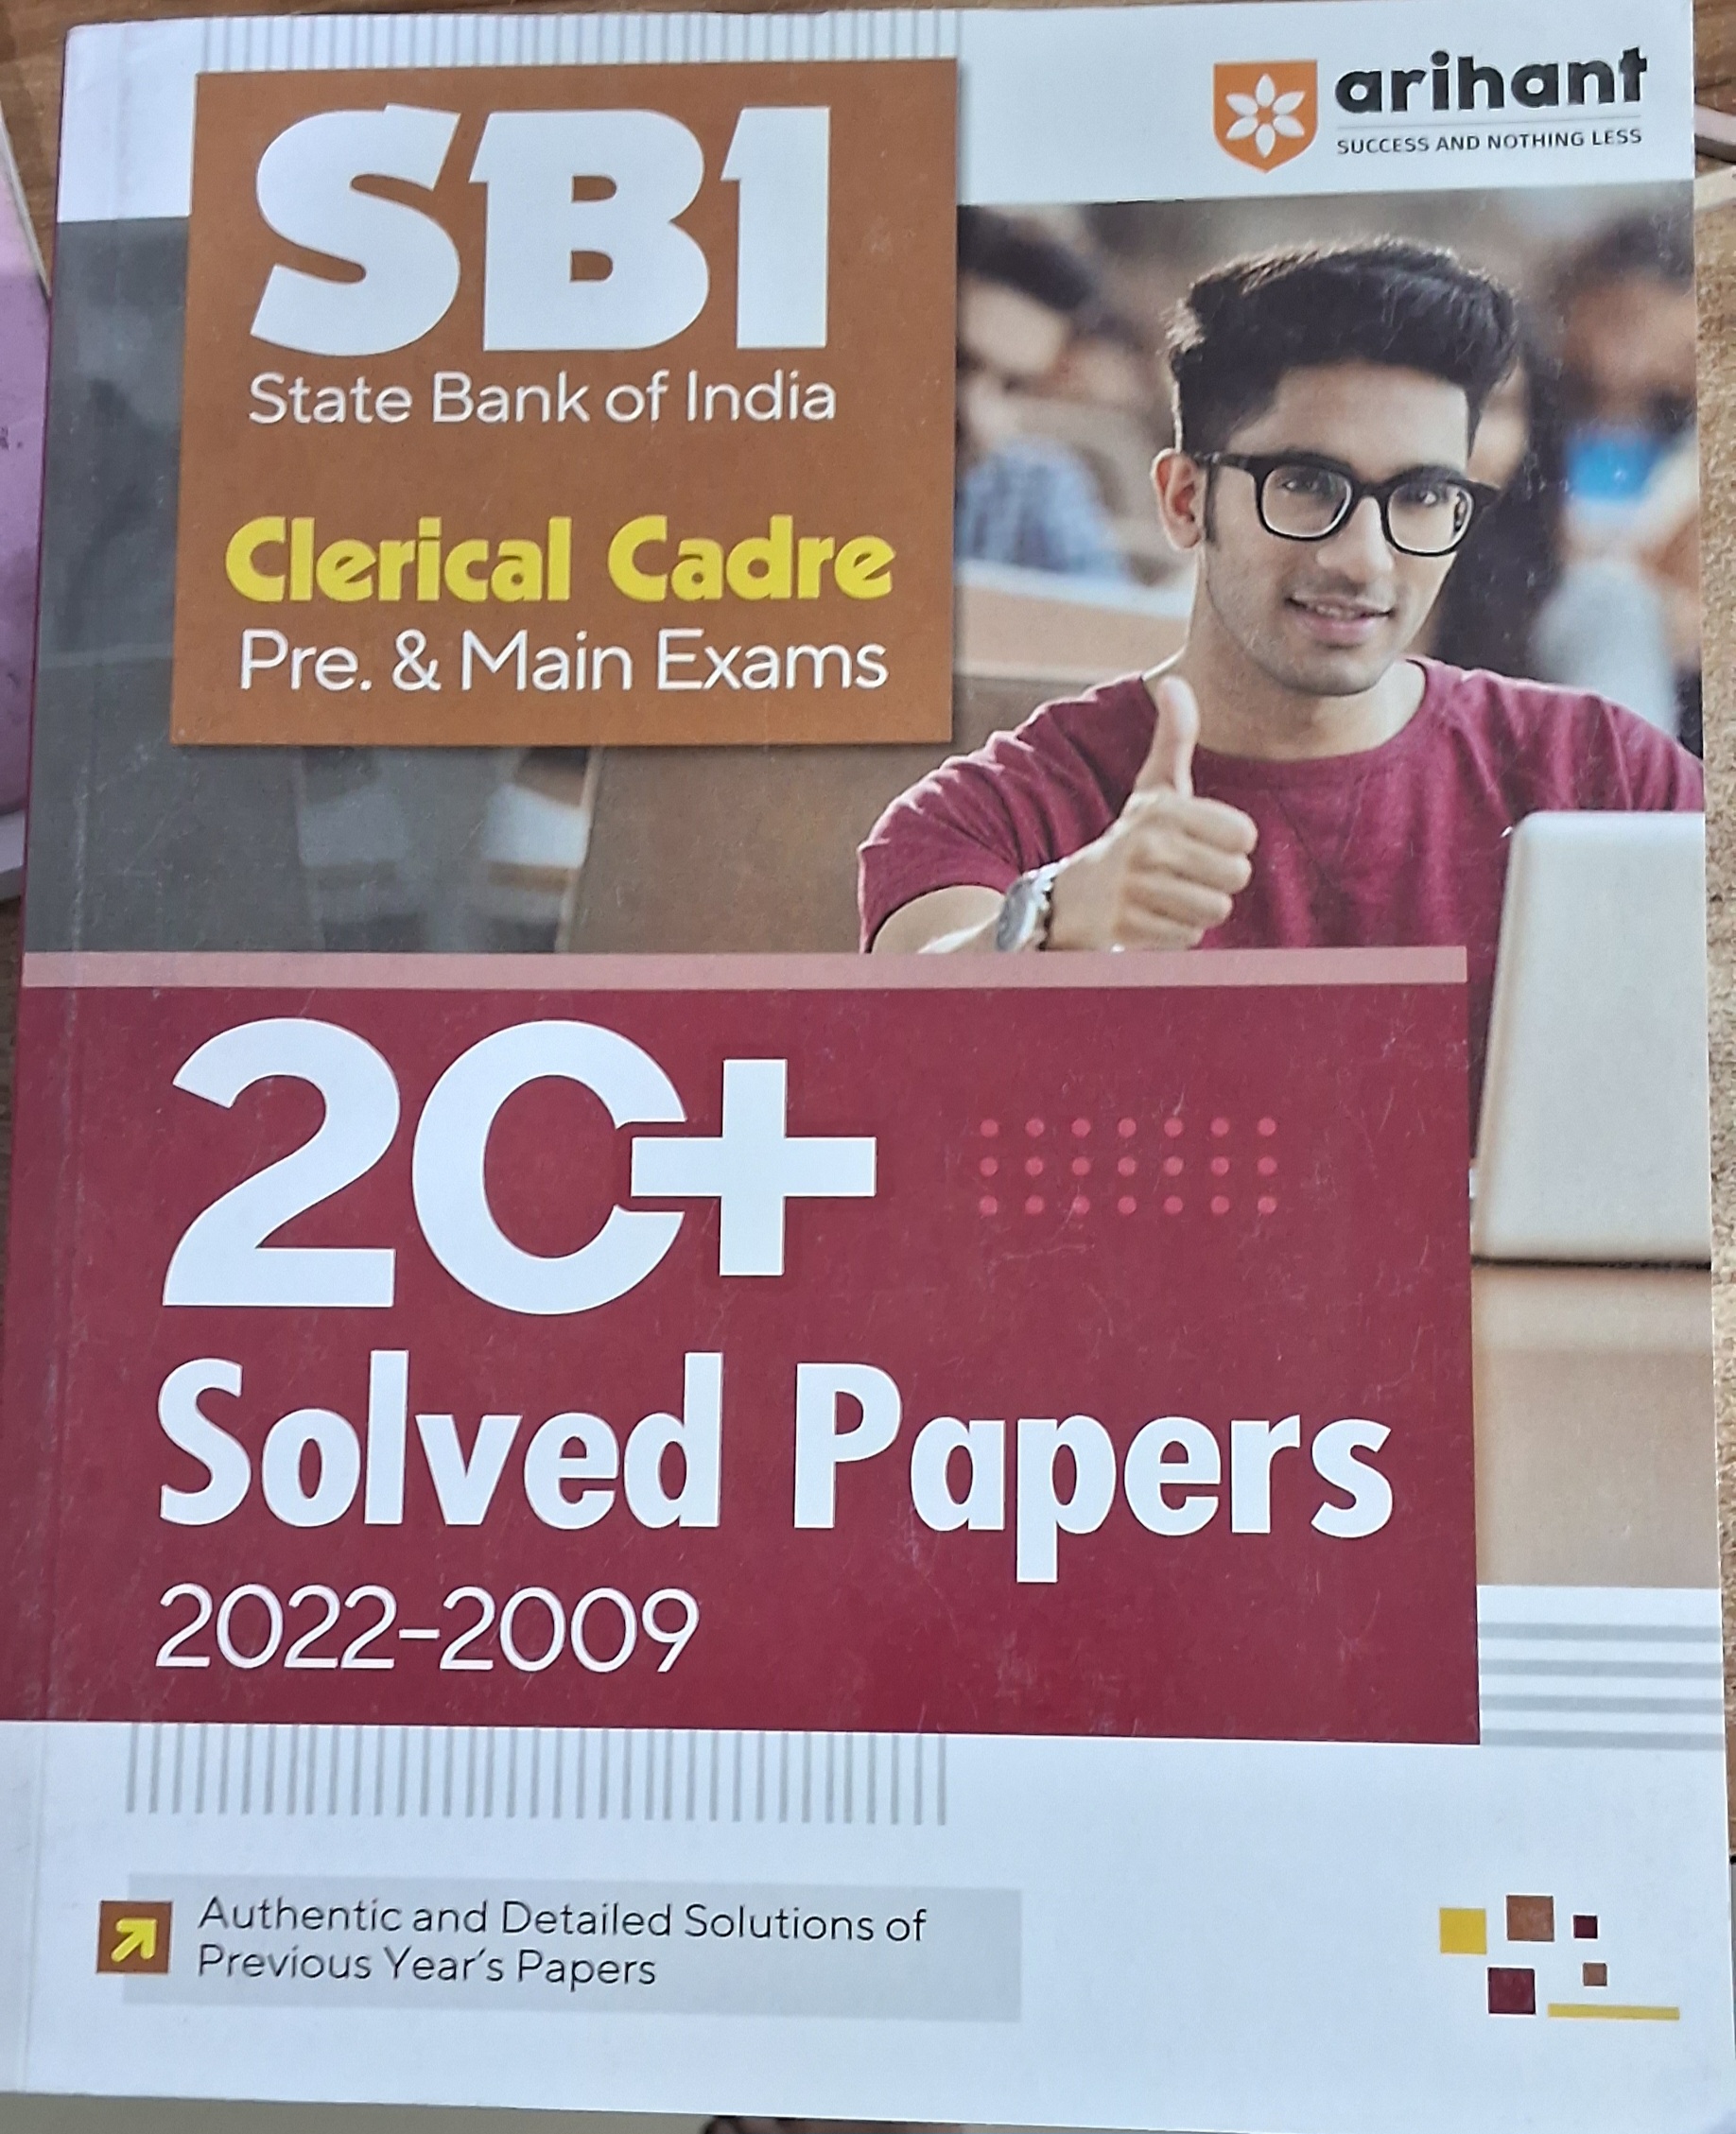 Sbi Clerical Cadre Pre & Main Exams 20+ Solved Papers 2022-2009-new